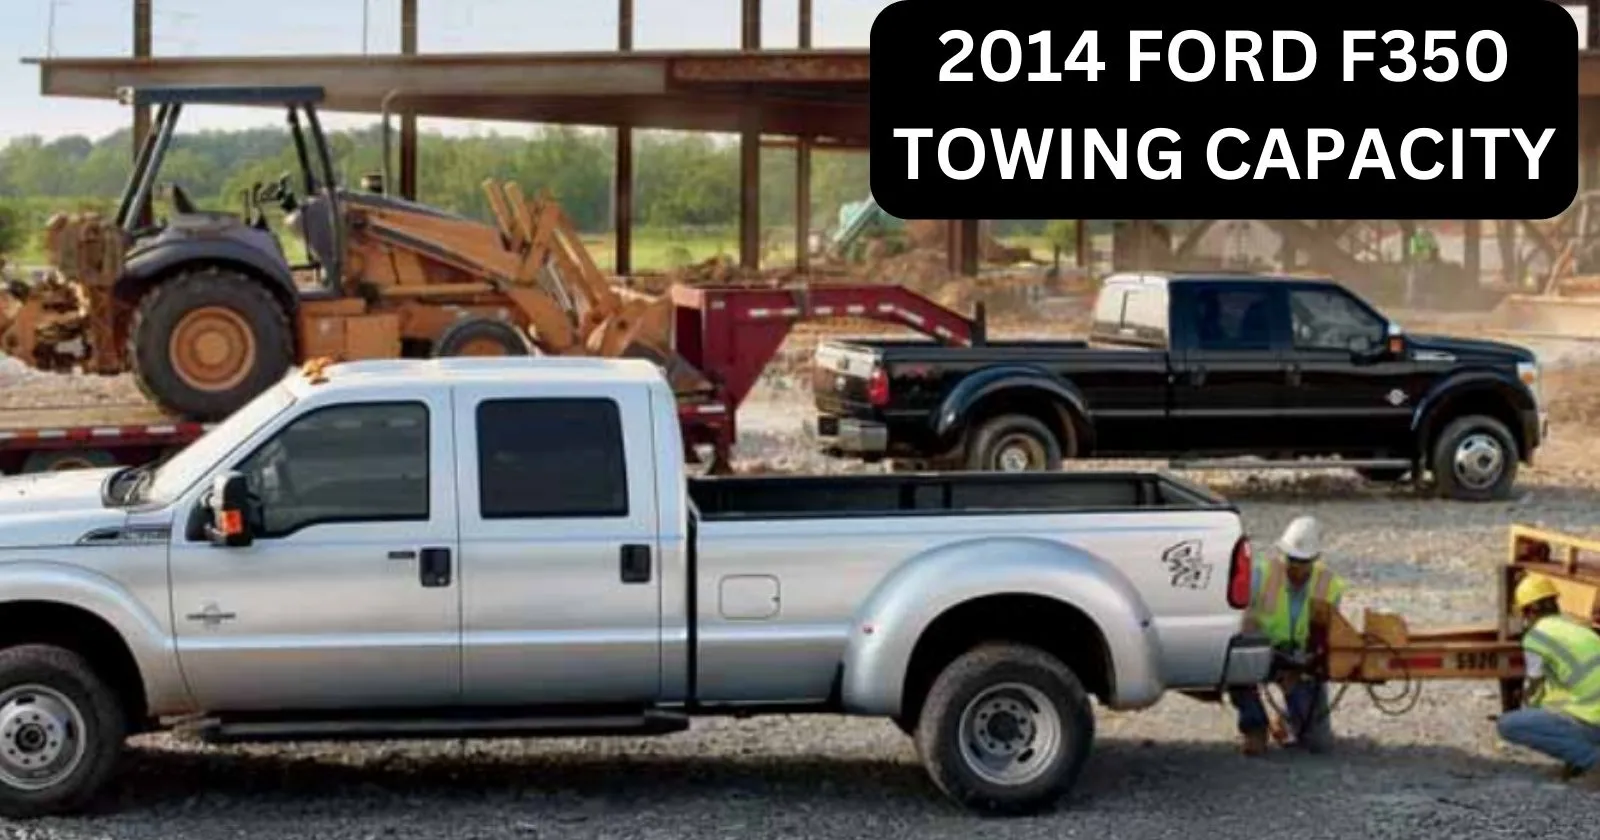 explore-2014-ford-f350-towing-capacity-with-chart-thecartowing